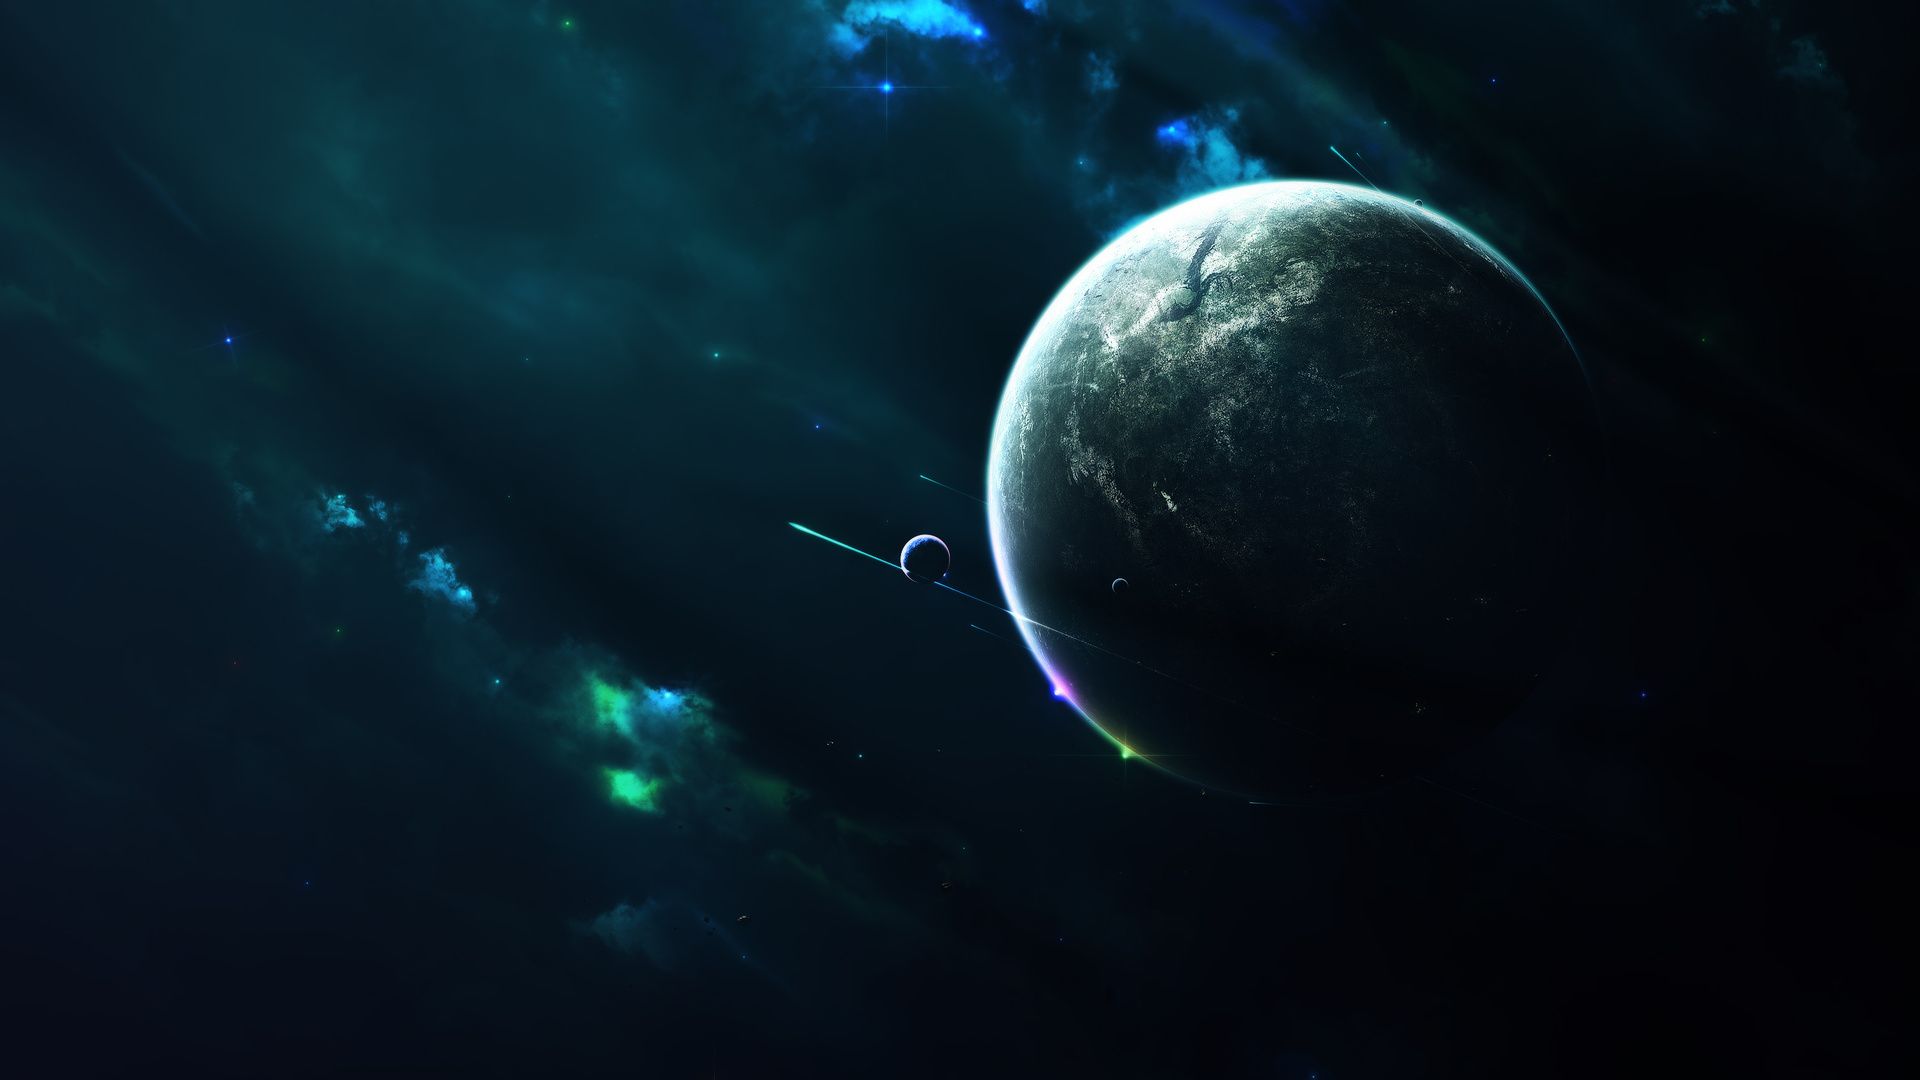 Space Themed wallpaper photo hd